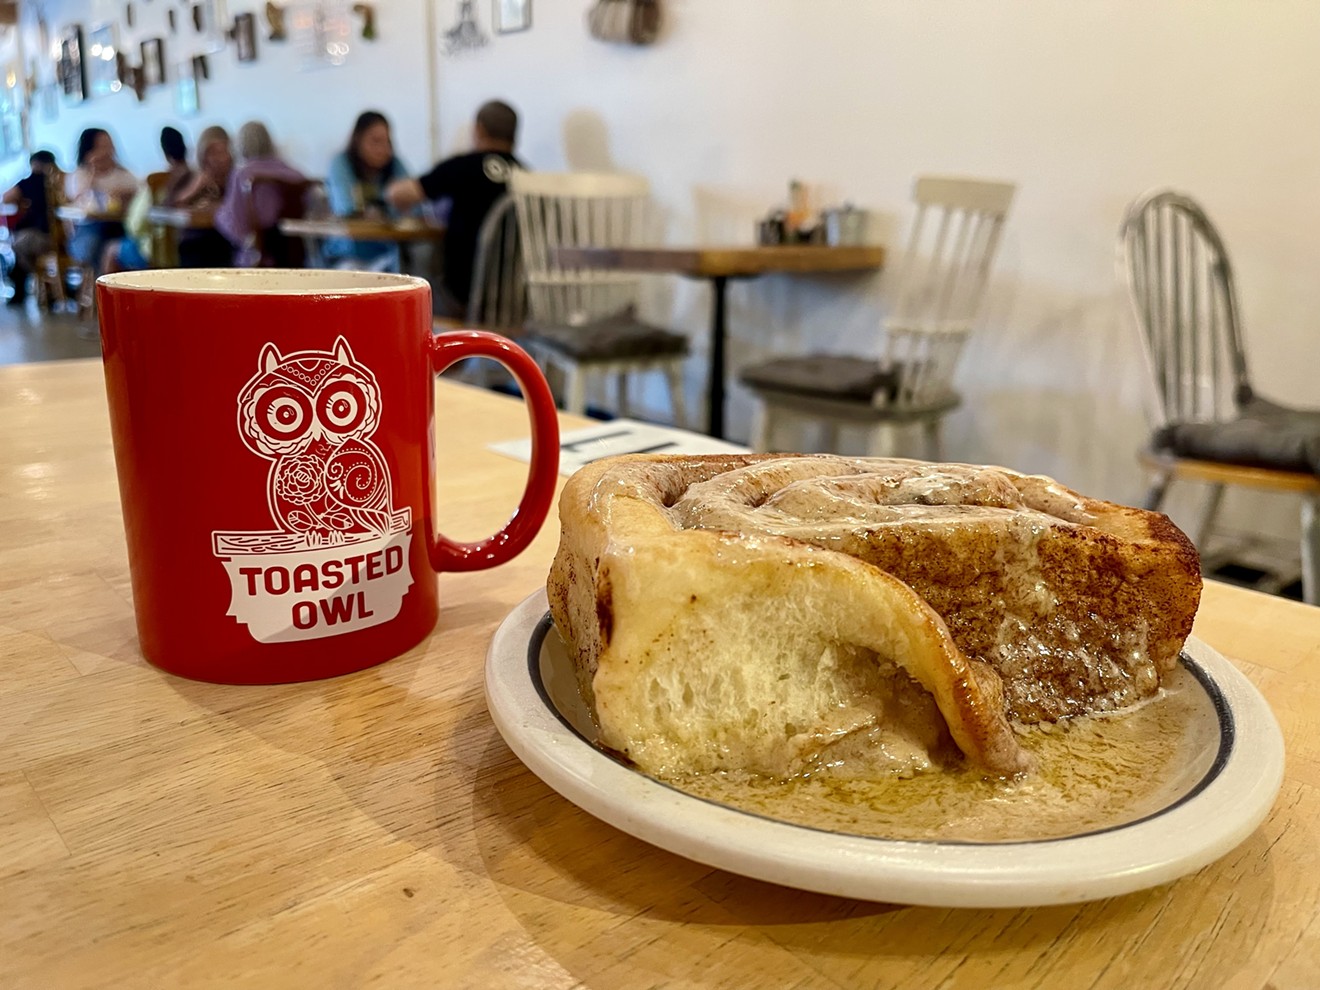 Start your journey at The Toasted Owl Cafe with coffee and a cinnamon roll.